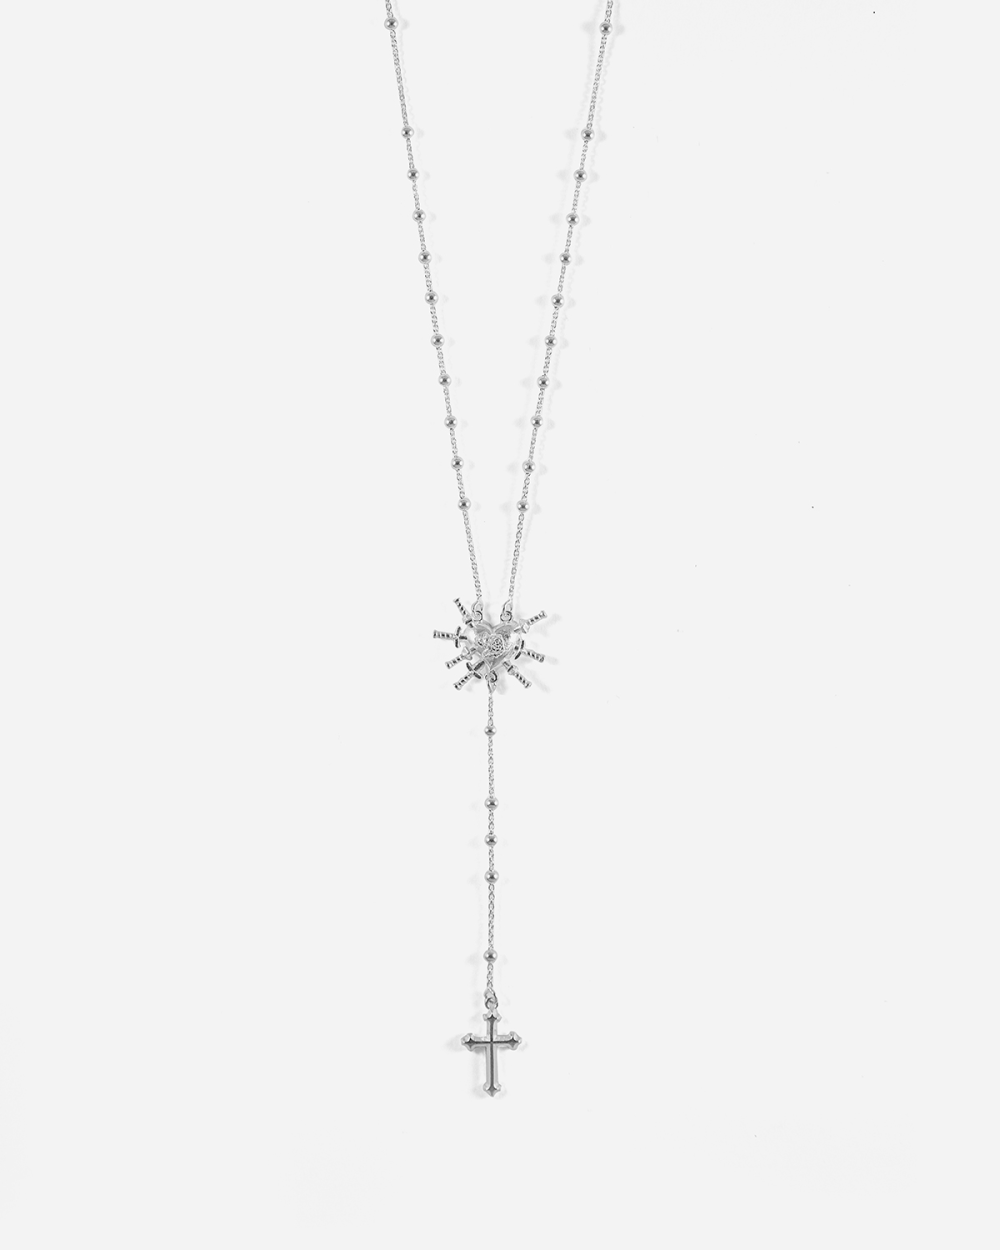 7 SWORDS IN HEART ROSARY NECKLACE